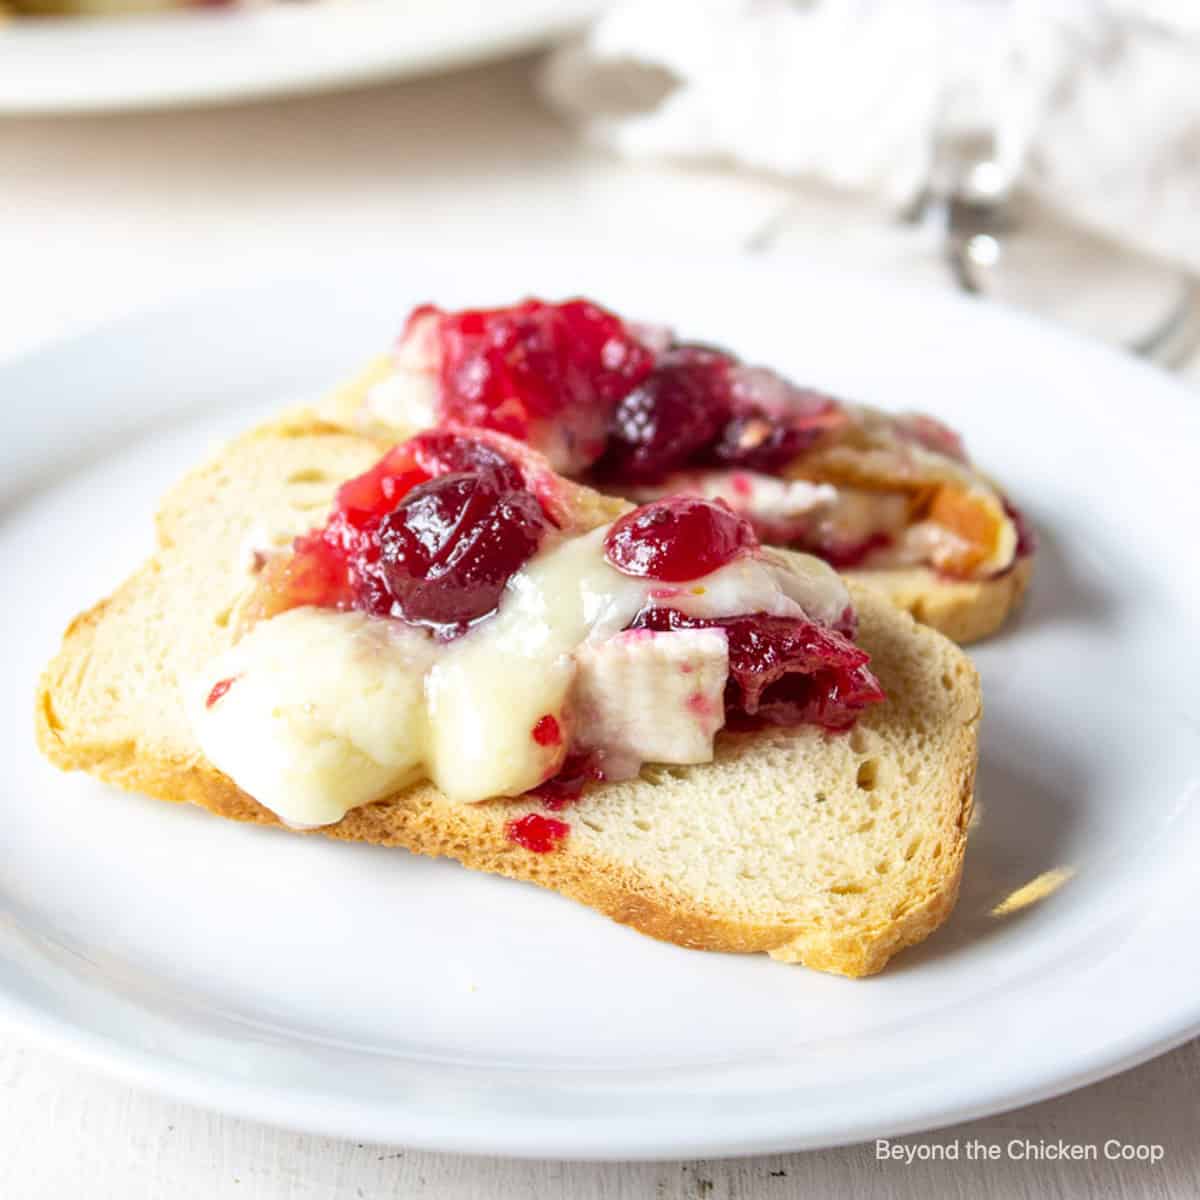 Toasted bread topped with brie and cranberries.